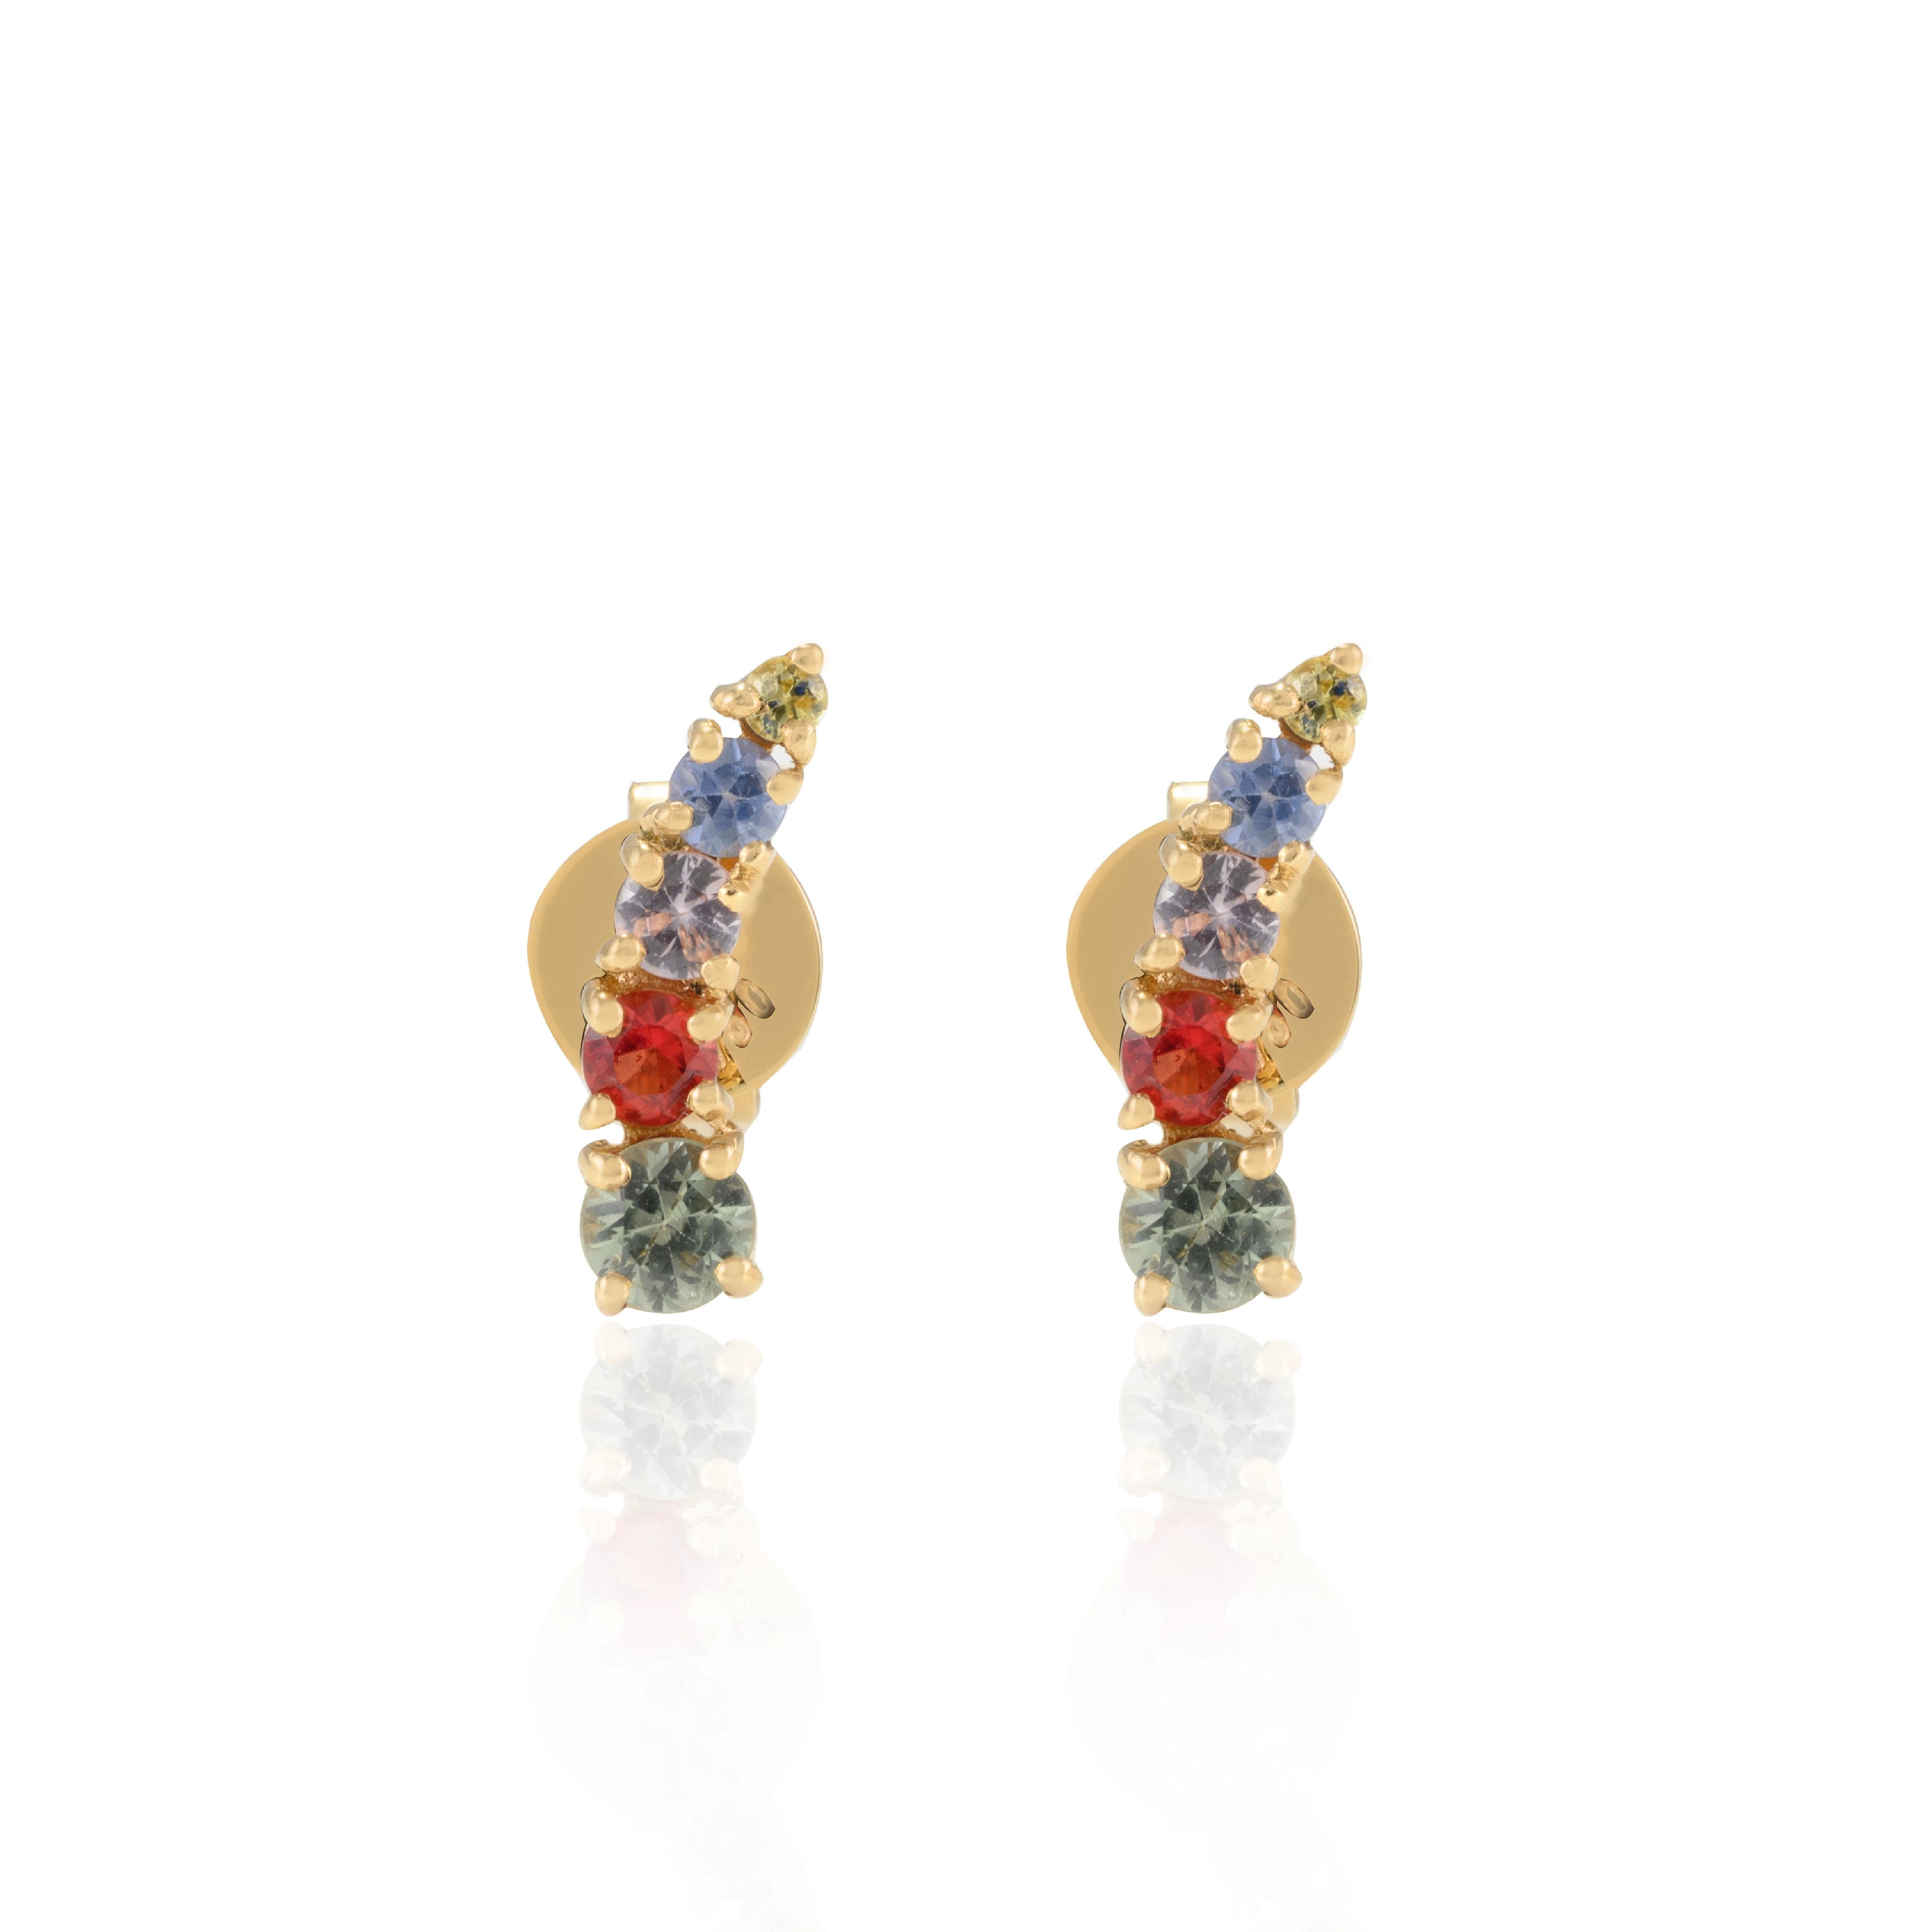 Minimalist Multi Gemstone Pushback Climber Stud Earrings in 18K Gold to make a statement with your look. You shall need stud earrings to make a statement with your look. These earrings create a sparkling, luxurious look featuring round cut